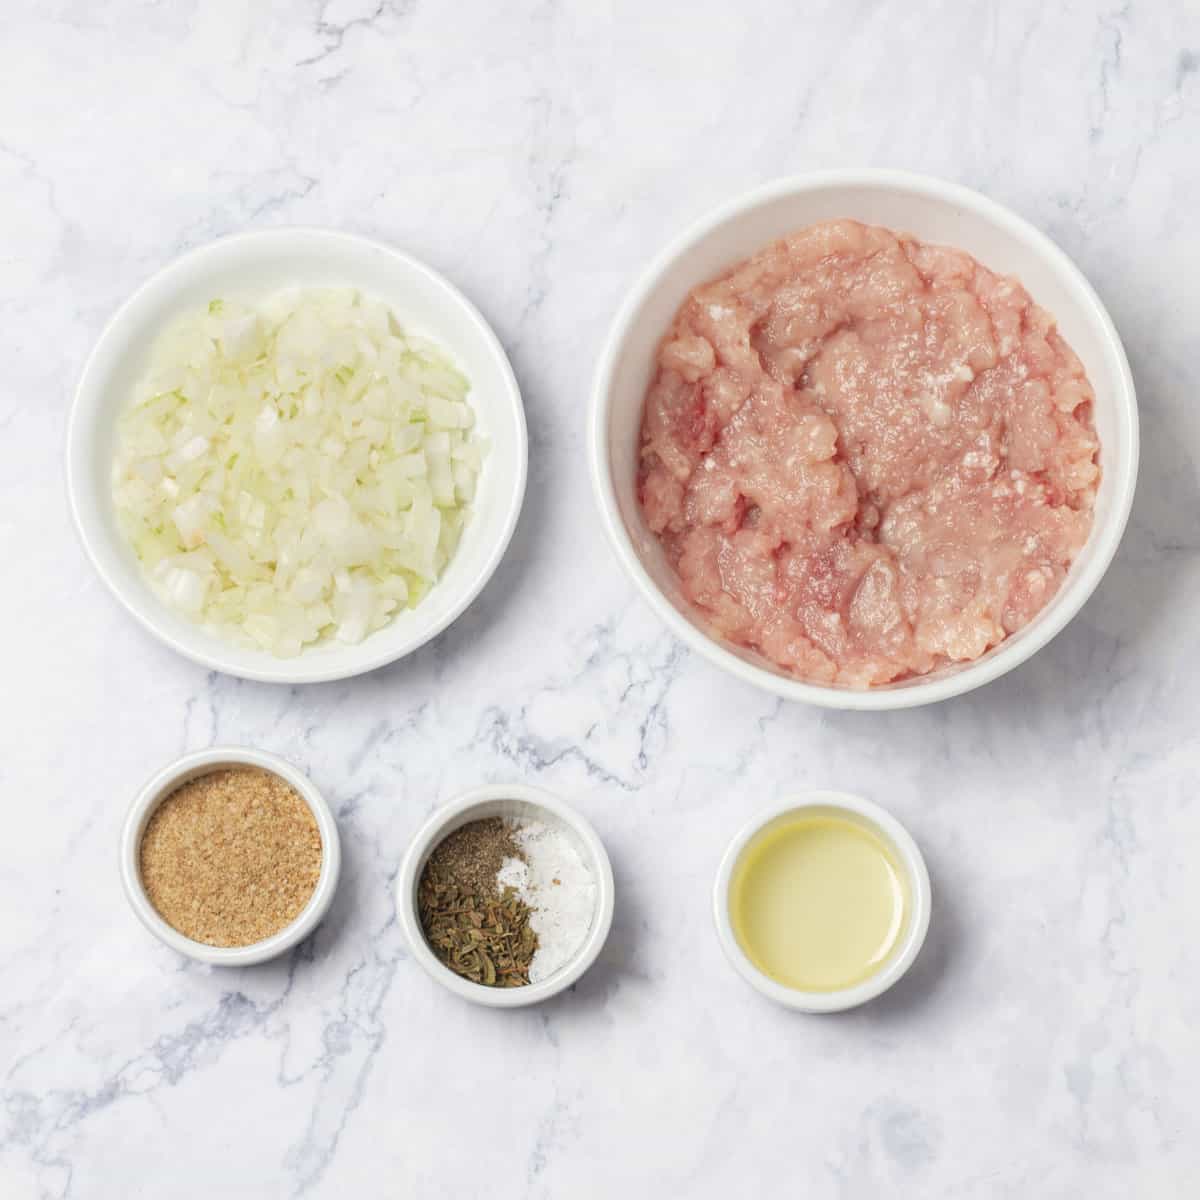 Raw ingredients of ground turkey, chopped onion, and spices in separate dishes.